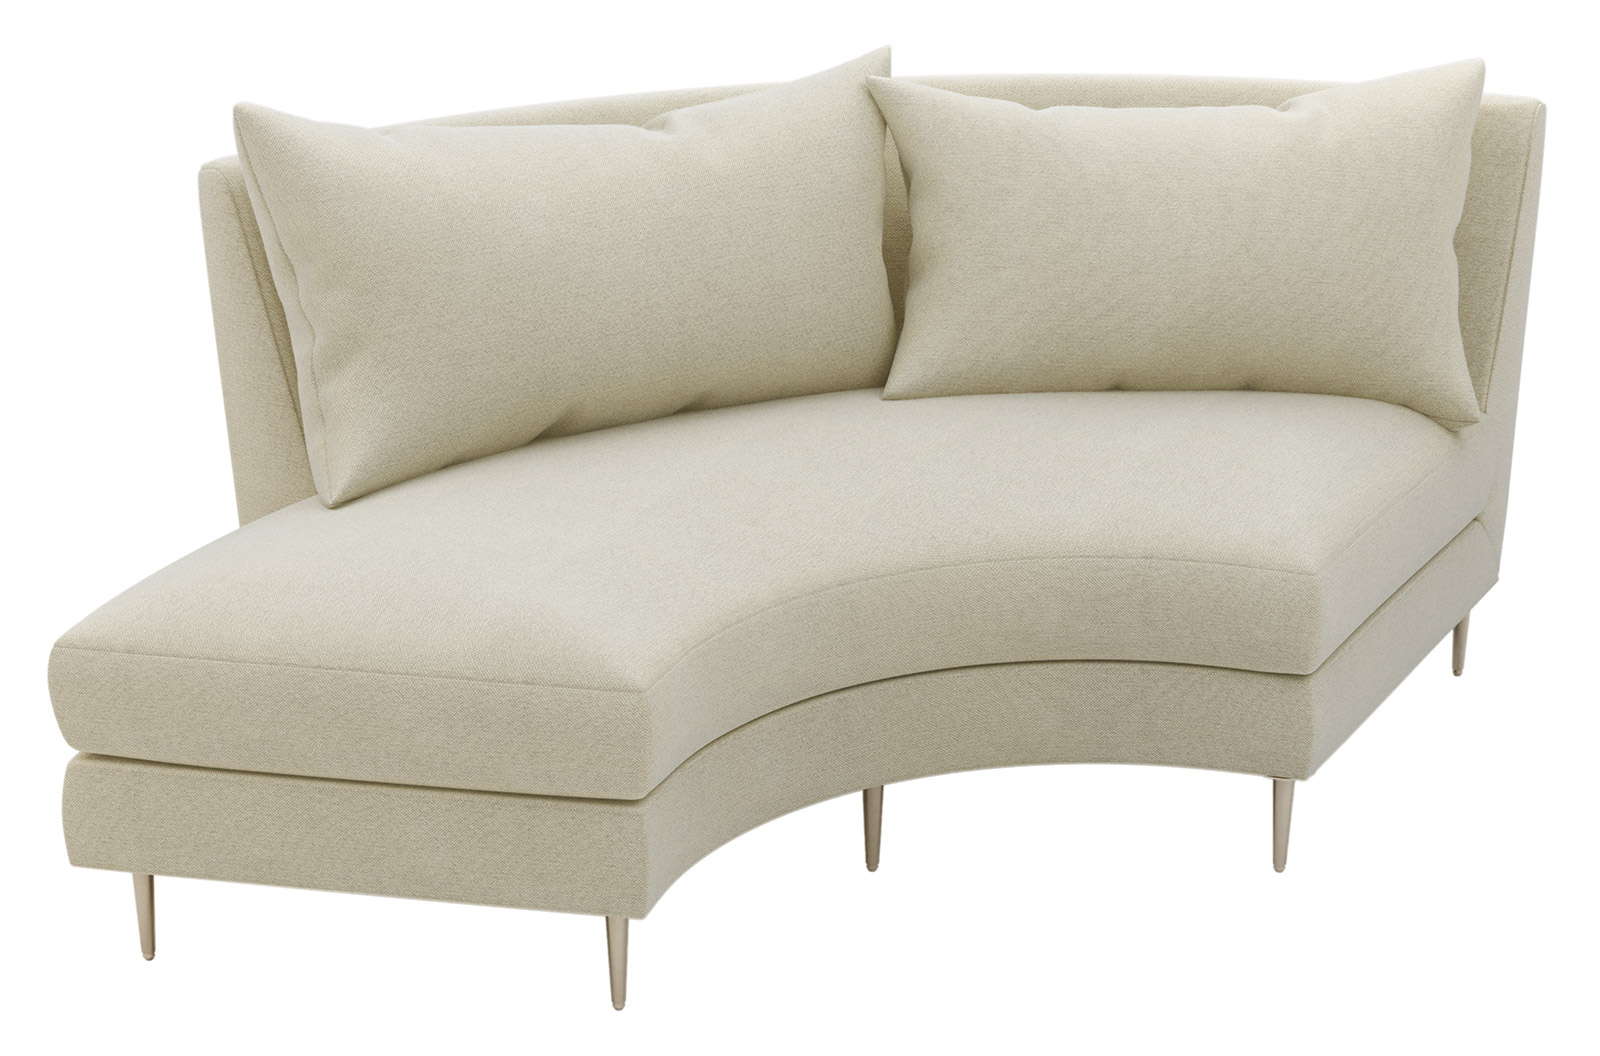 Seasonal Living Fizz Mimosa Tropicale Armless Sofa With Bumper - Left Side Facing